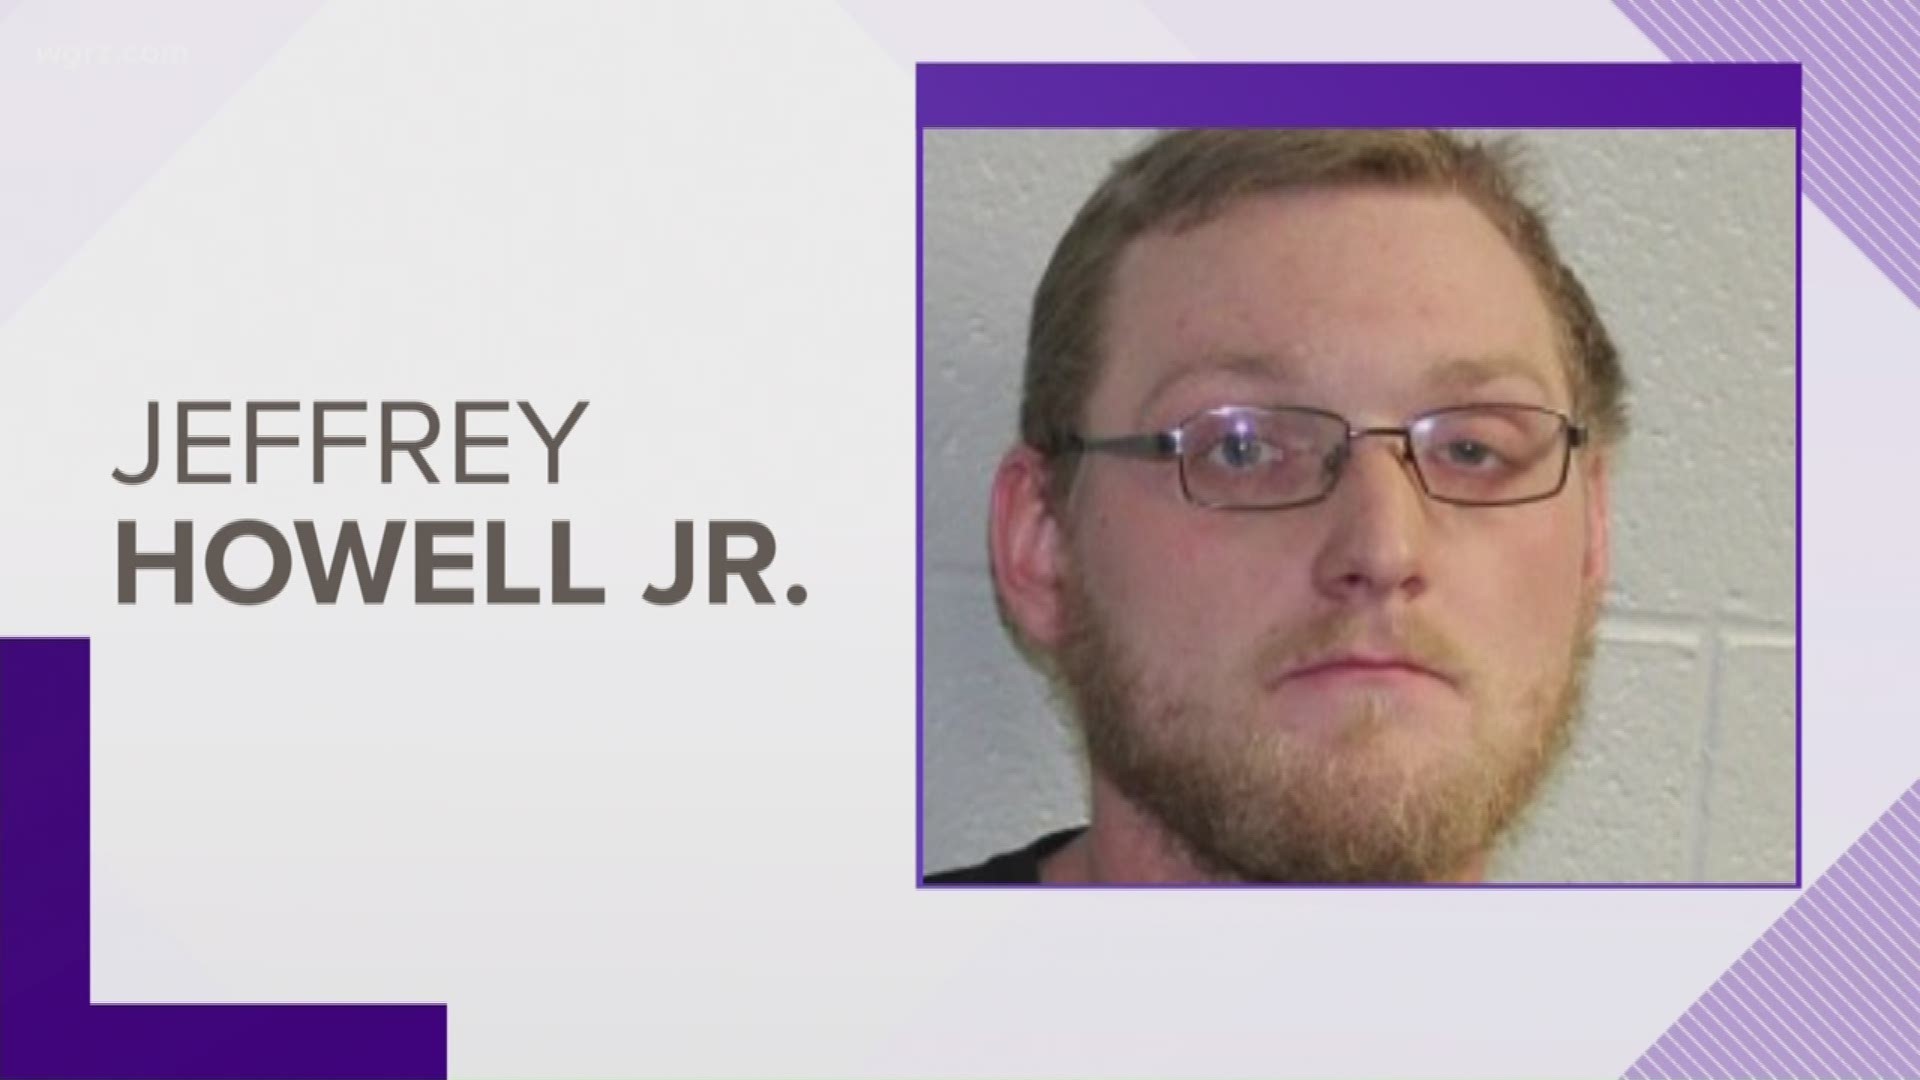 Jeffrey Howell Jr.  is charged with rape of a child